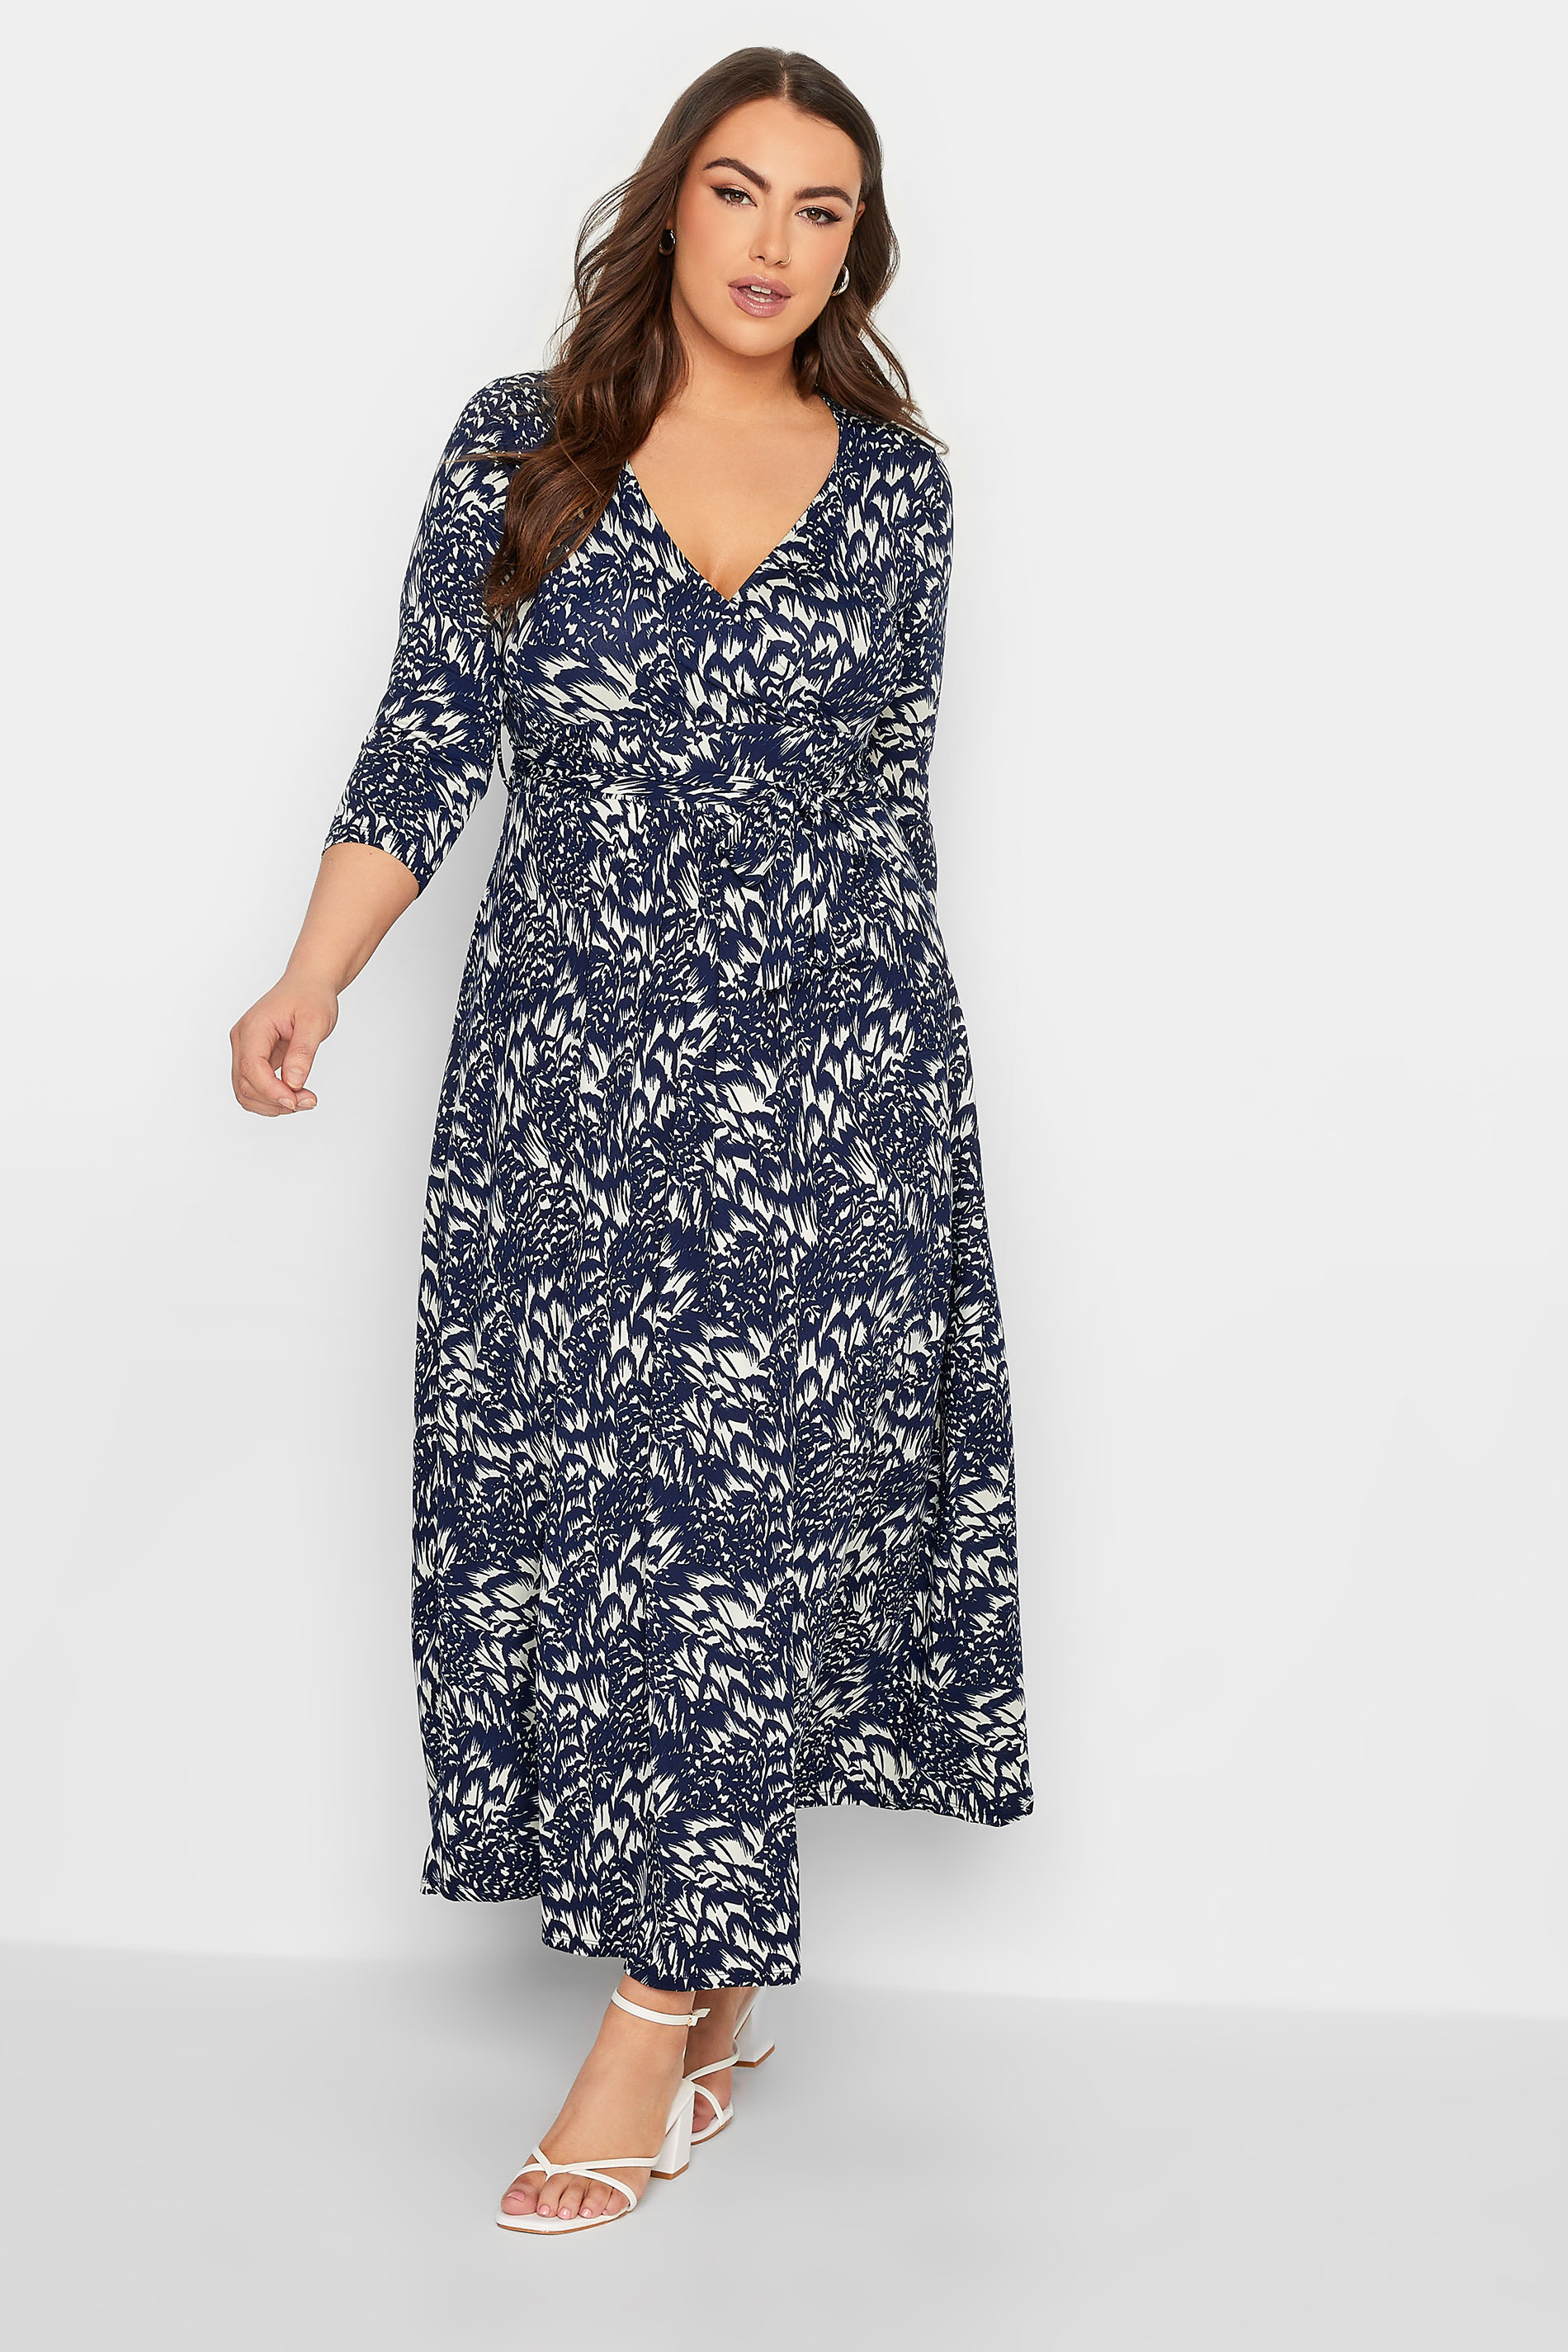 YOURS Curve Plus Size Navy Blue Floral Print Maxi Dress | Yours Clothing  2